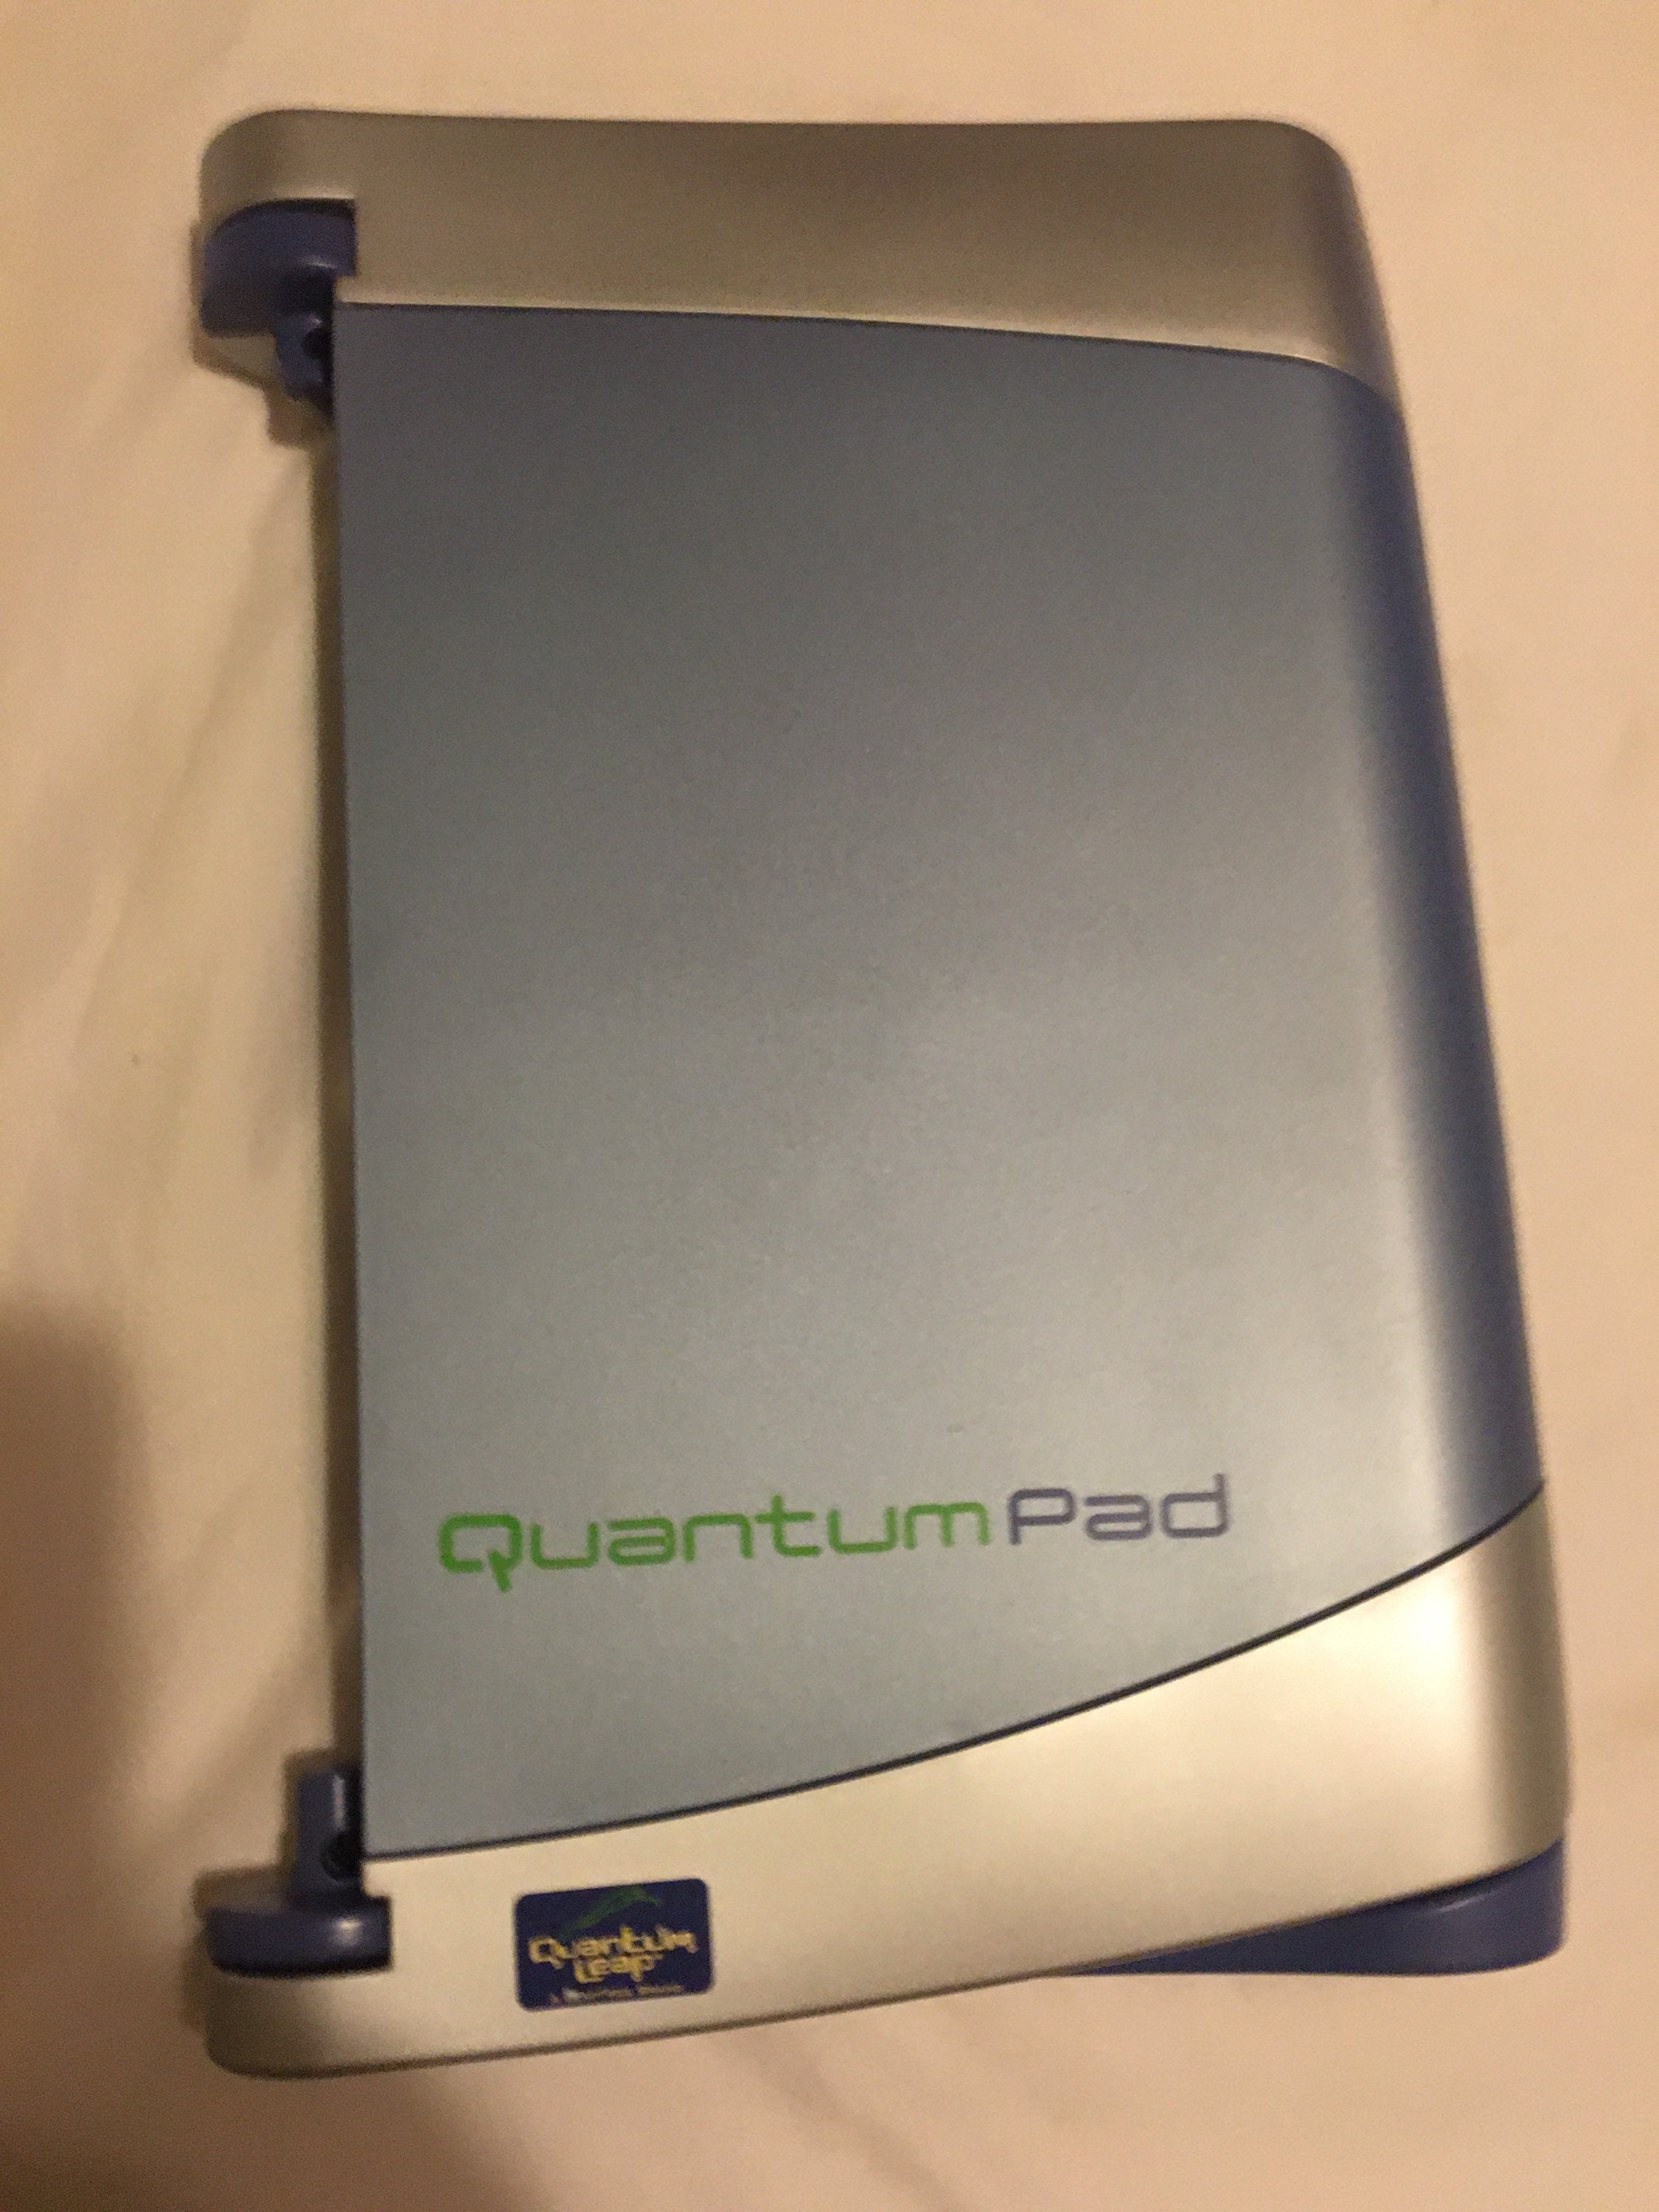 Leapfrog Quantum Leap Pad 30025 Interactive Learning System With 3